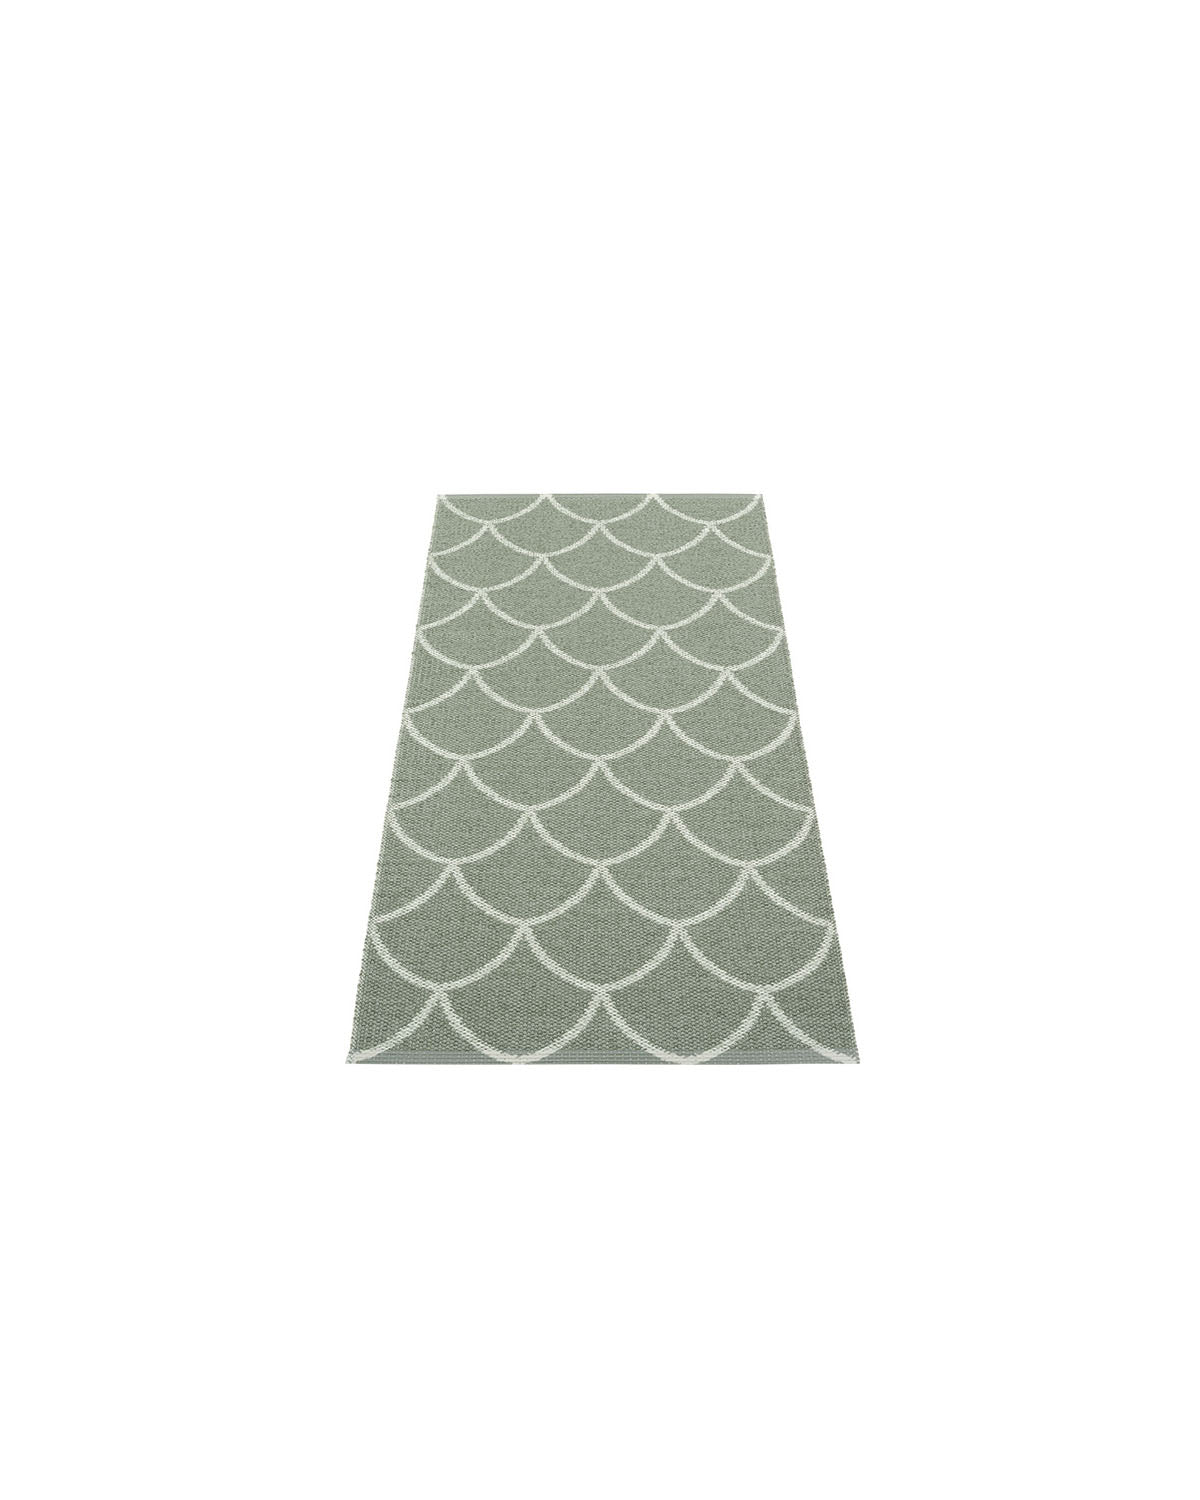 Pappelina Rug KOTTE Army  image 1